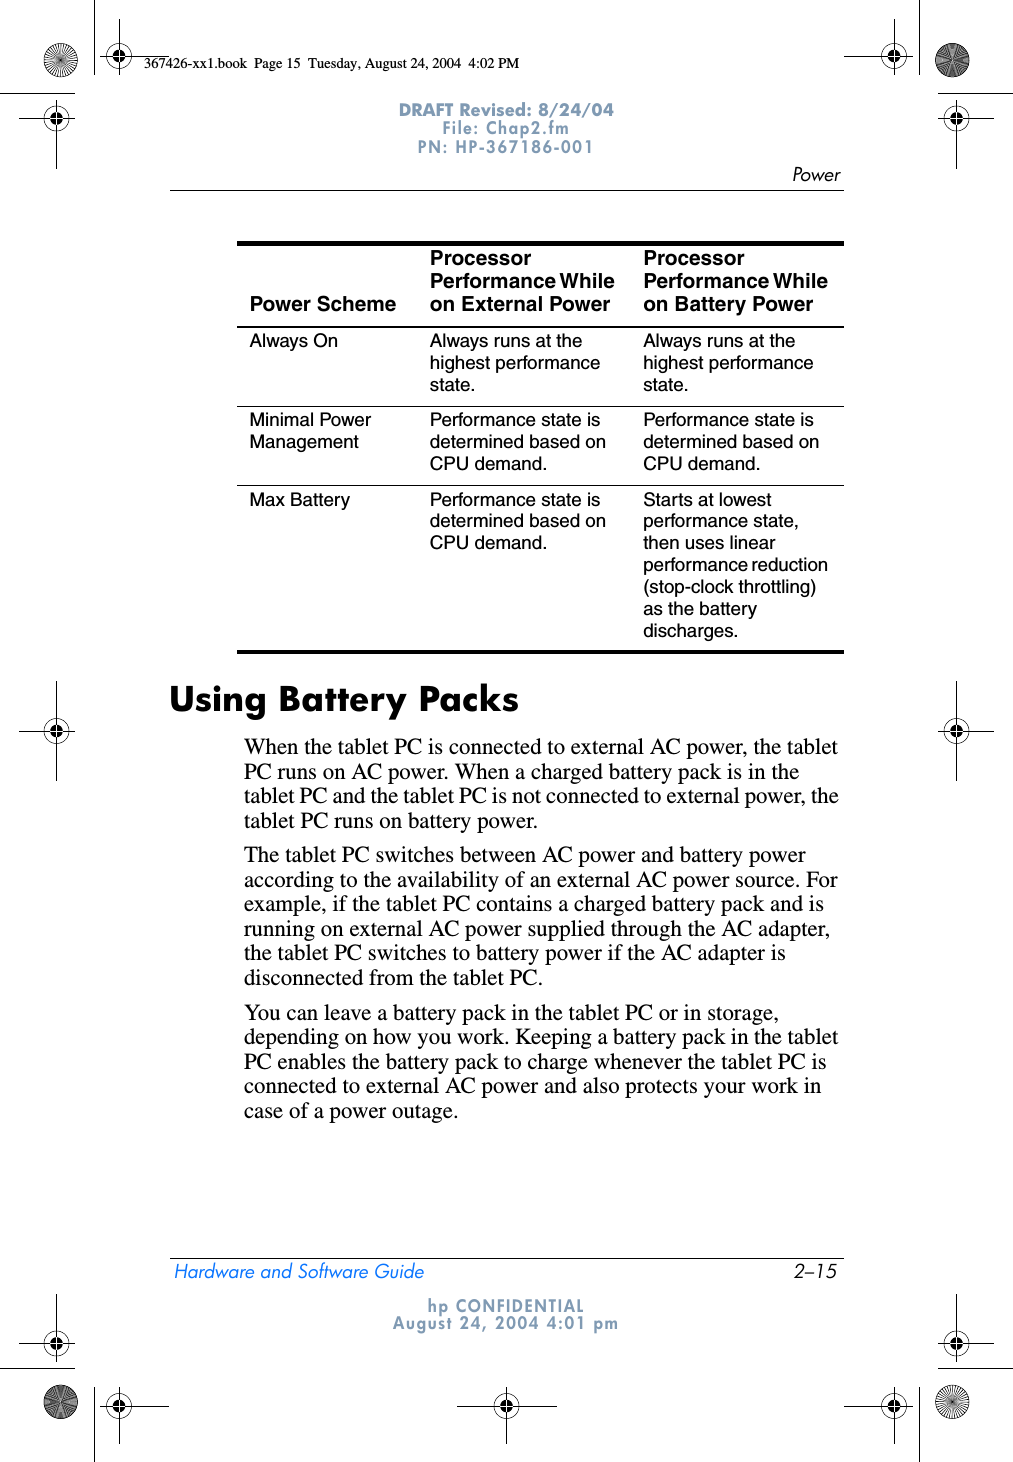 PowerHardware and Software Guide 2–15DRAFT Revised: 8/24/04File: Chap2.fm PN: HP-367186-001 hp CONFIDENTIALAugust 24, 2004 4:01 pmUsing Battery PacksWhen the tablet PC is connected to external AC power, the tablet PC runs on AC power. When a charged battery pack is in the tablet PC and the tablet PC is not connected to external power, the tablet PC runs on battery power.The tablet PC switches between AC power and battery power according to the availability of an external AC power source. For example, if the tablet PC contains a charged battery pack and is running on external AC power supplied through the AC adapter, the tablet PC switches to battery power if the AC adapter is disconnected from the tablet PC.You can leave a battery pack in the tablet PC or in storage, depending on how you work. Keeping a battery pack in the tablet PC enables the battery pack to charge whenever the tablet PC is connected to external AC power and also protects your work in case of a power outage.Always On Always runs at the highest performance state.Always runs at the highest performance state.Minimal Power ManagementPerformance state is determined based on CPU demand.Performance state is determined based on CPU demand.Max Battery Performance state is determined based on CPU demand.Starts at lowest performance state, then uses linear performance reduction (stop-clock throttling) as the battery discharges.Power SchemeProcessor Performance While on External Power Processor Performance While on Battery Power 367426-xx1.book  Page 15  Tuesday, August 24, 2004  4:02 PM